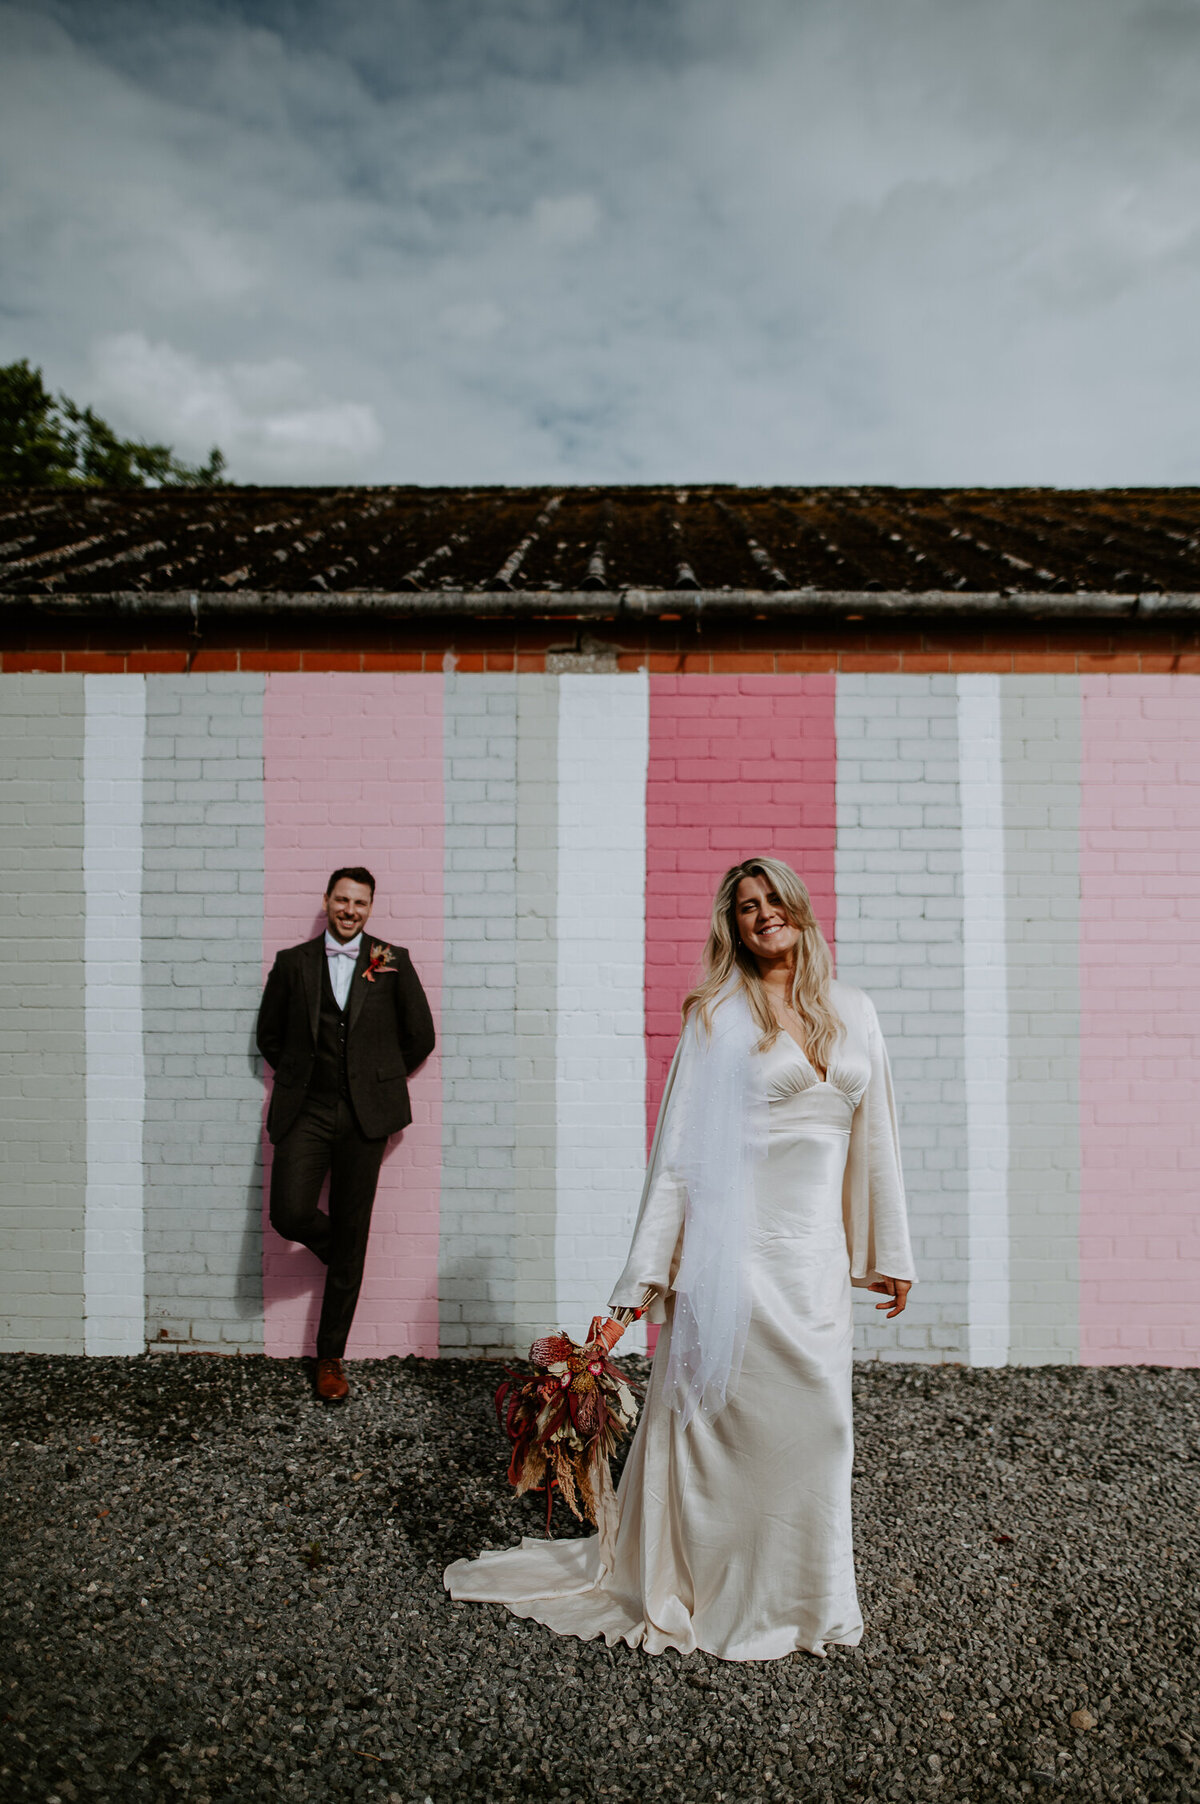 A Bride and Groom stand infant of a pink mural wall at White Syke Fields, a barn wedding venue in york with great natural light.